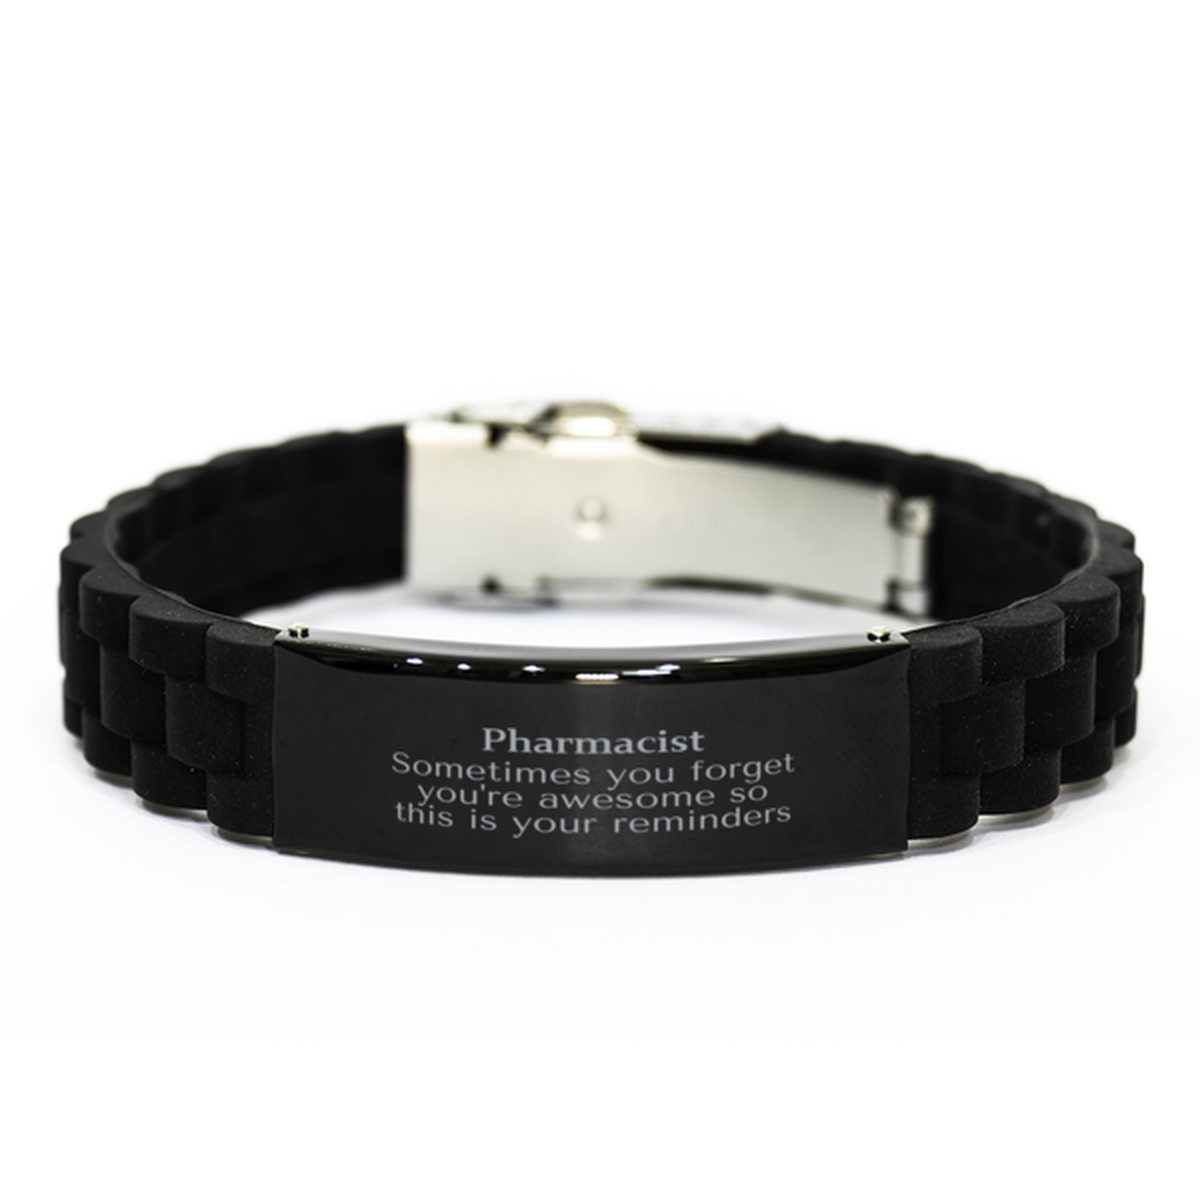 Sentimental Pharmacist Black Glidelock Clasp Bracelet, Pharmacist Sometimes you forget you're awesome so this is your reminders, Graduation Christmas Birthday Gifts for Pharmacist, Men, Women, Coworkers